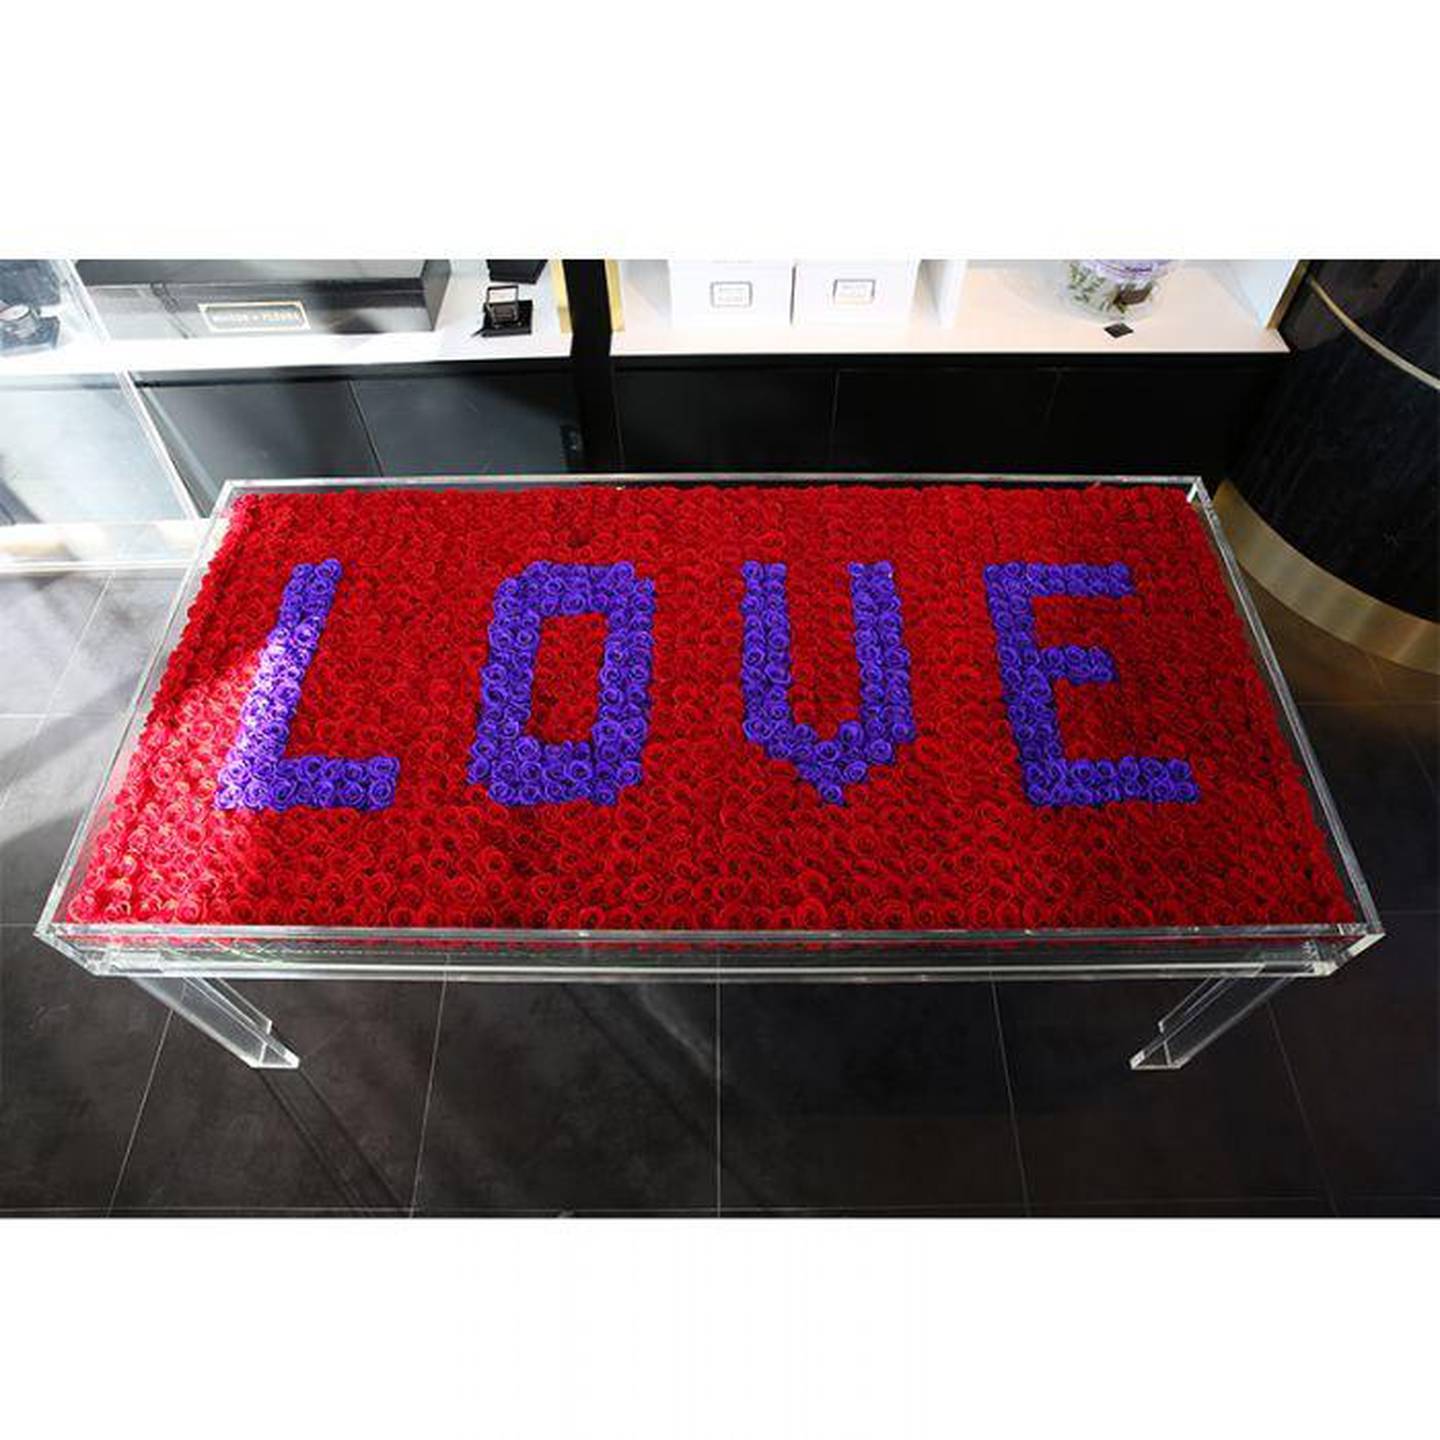 1081 long life red roses in acrylic rectangular table worth Dh71,500. Courtesy Maison Des Fleurs